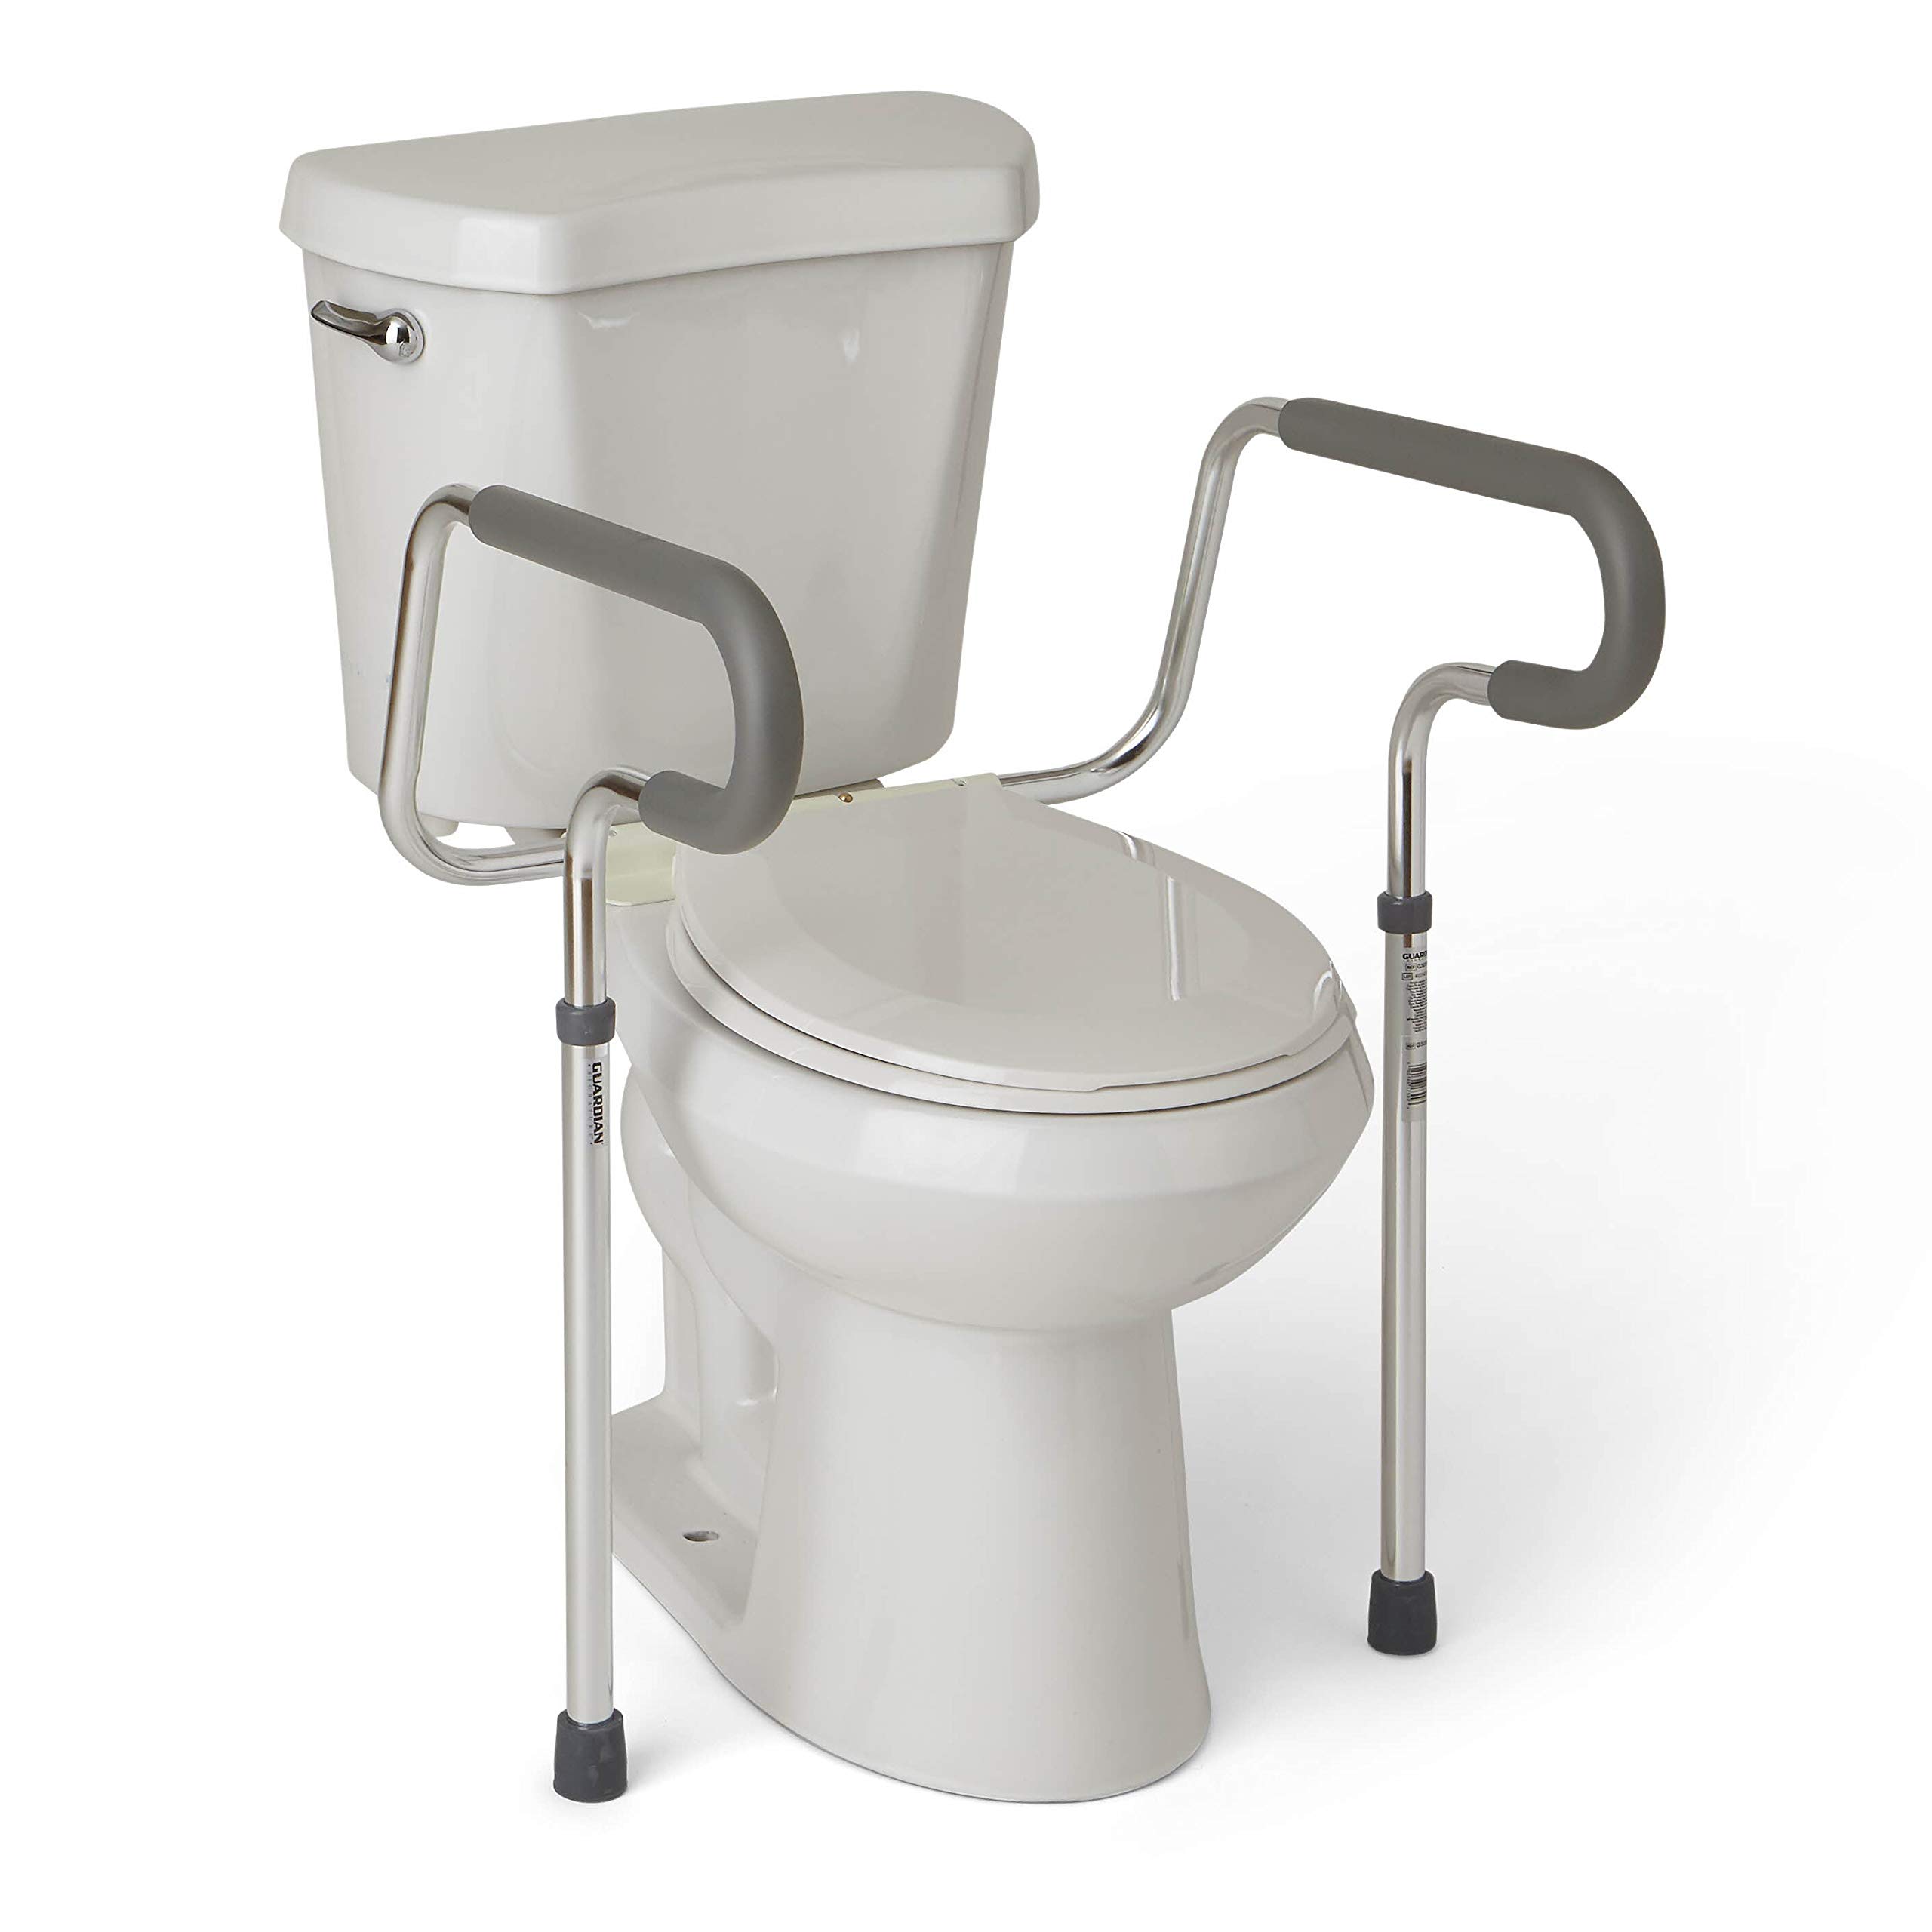 Medline's Guardian Toilet Safety Rail with Adjustable Height for Bathroom Safety, Toilet Assist, and Grab Bar (G30300H)